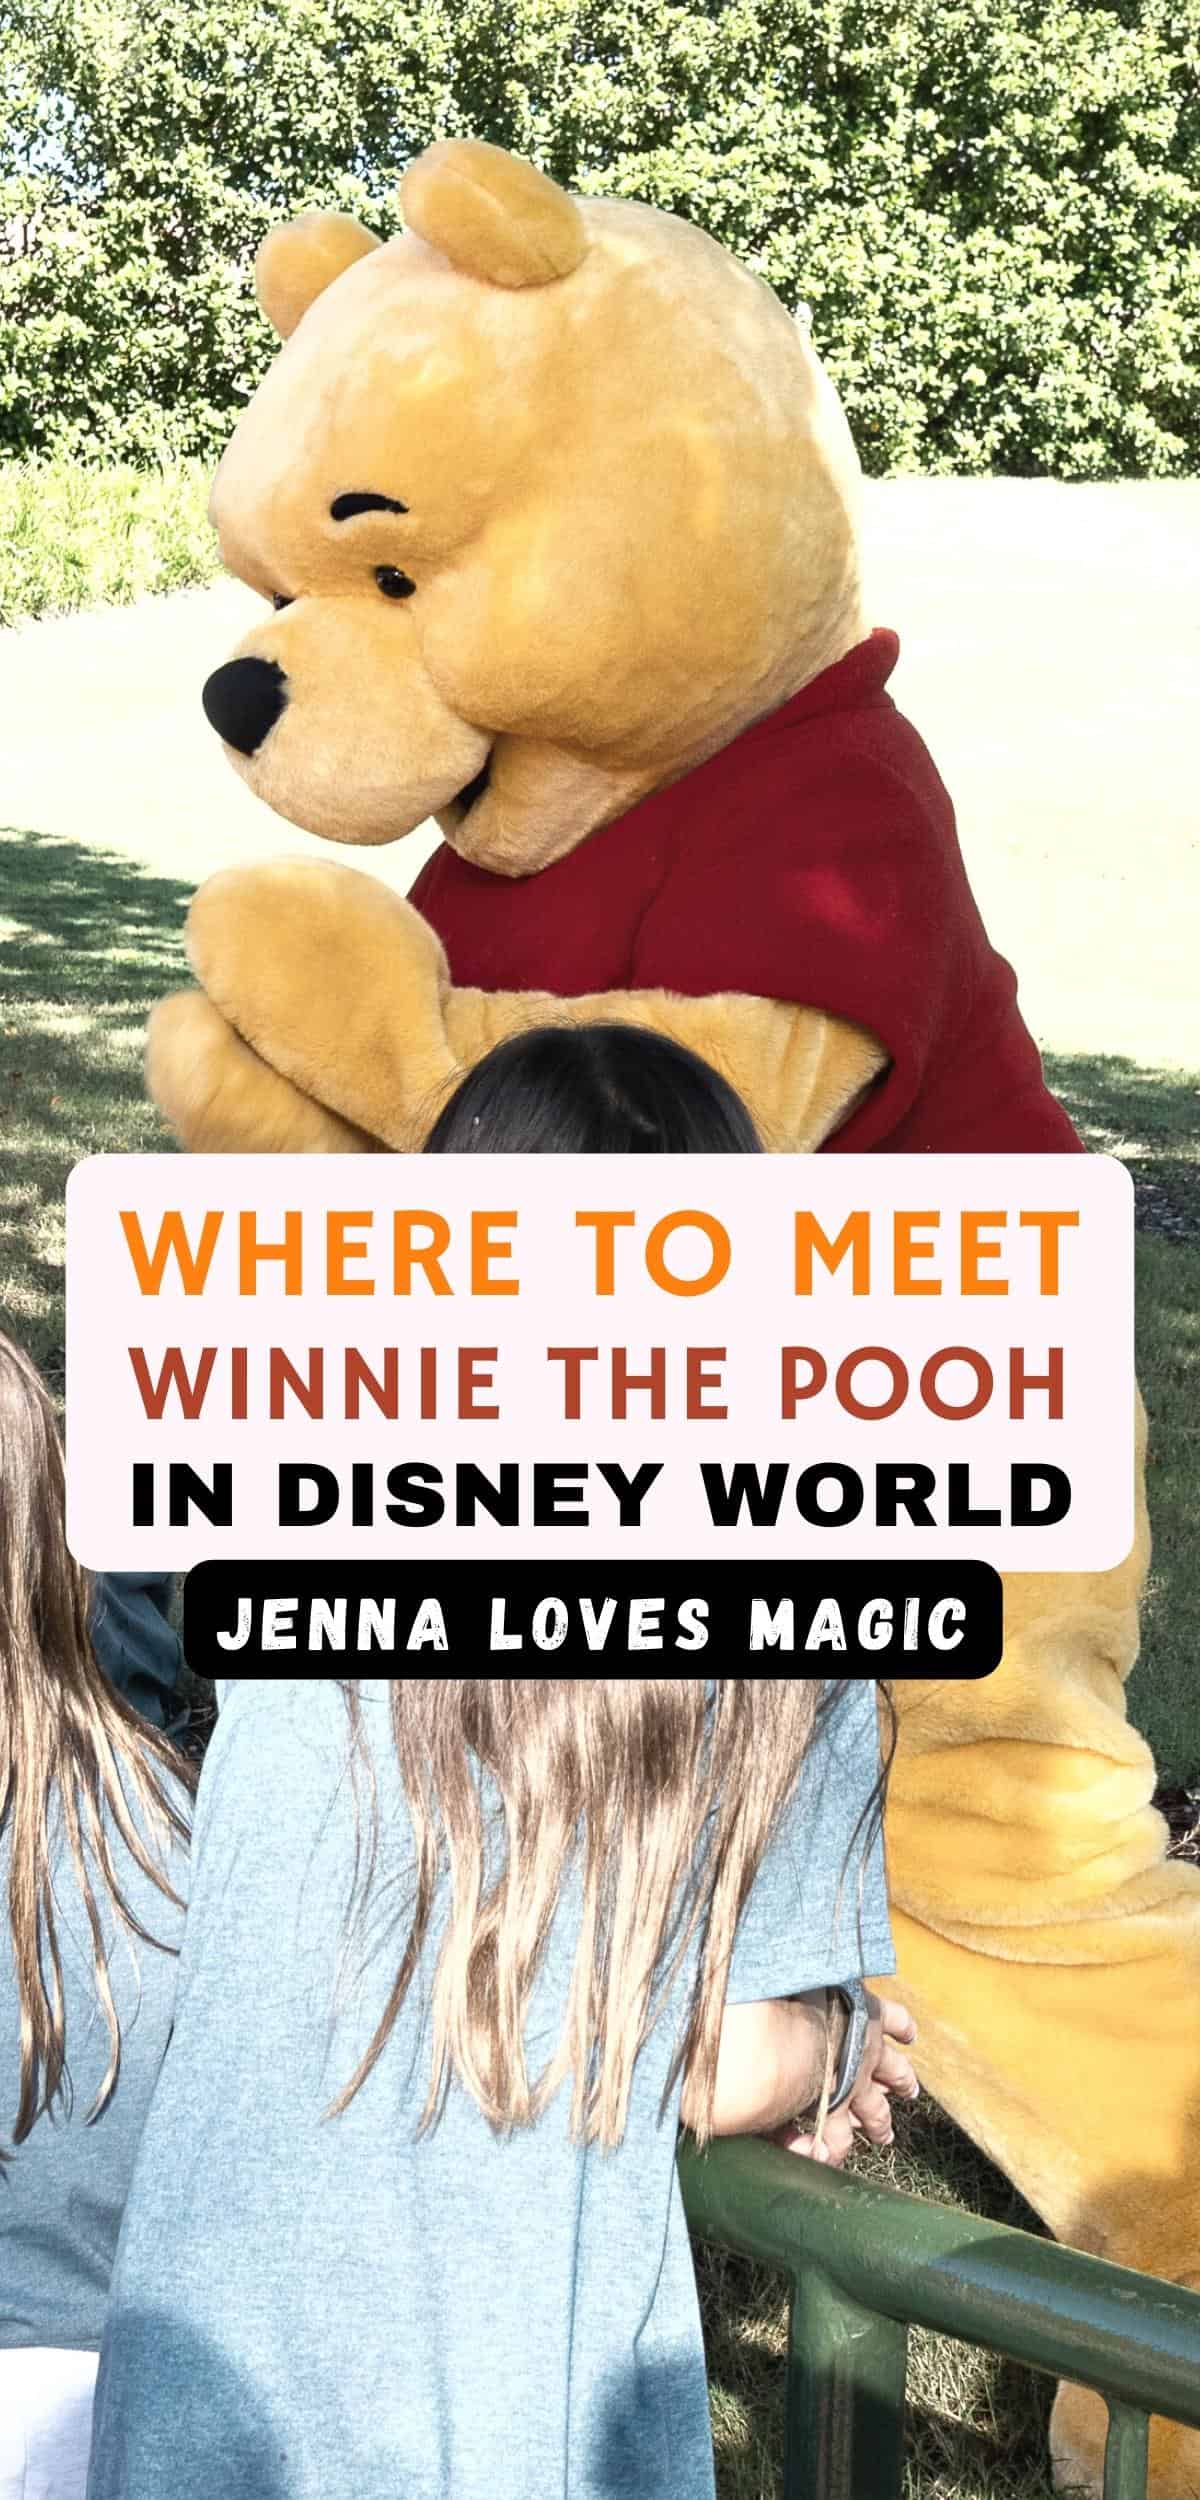 where to meet winnie the pooh text overlay with pooh bear character and jenna loves magic logo